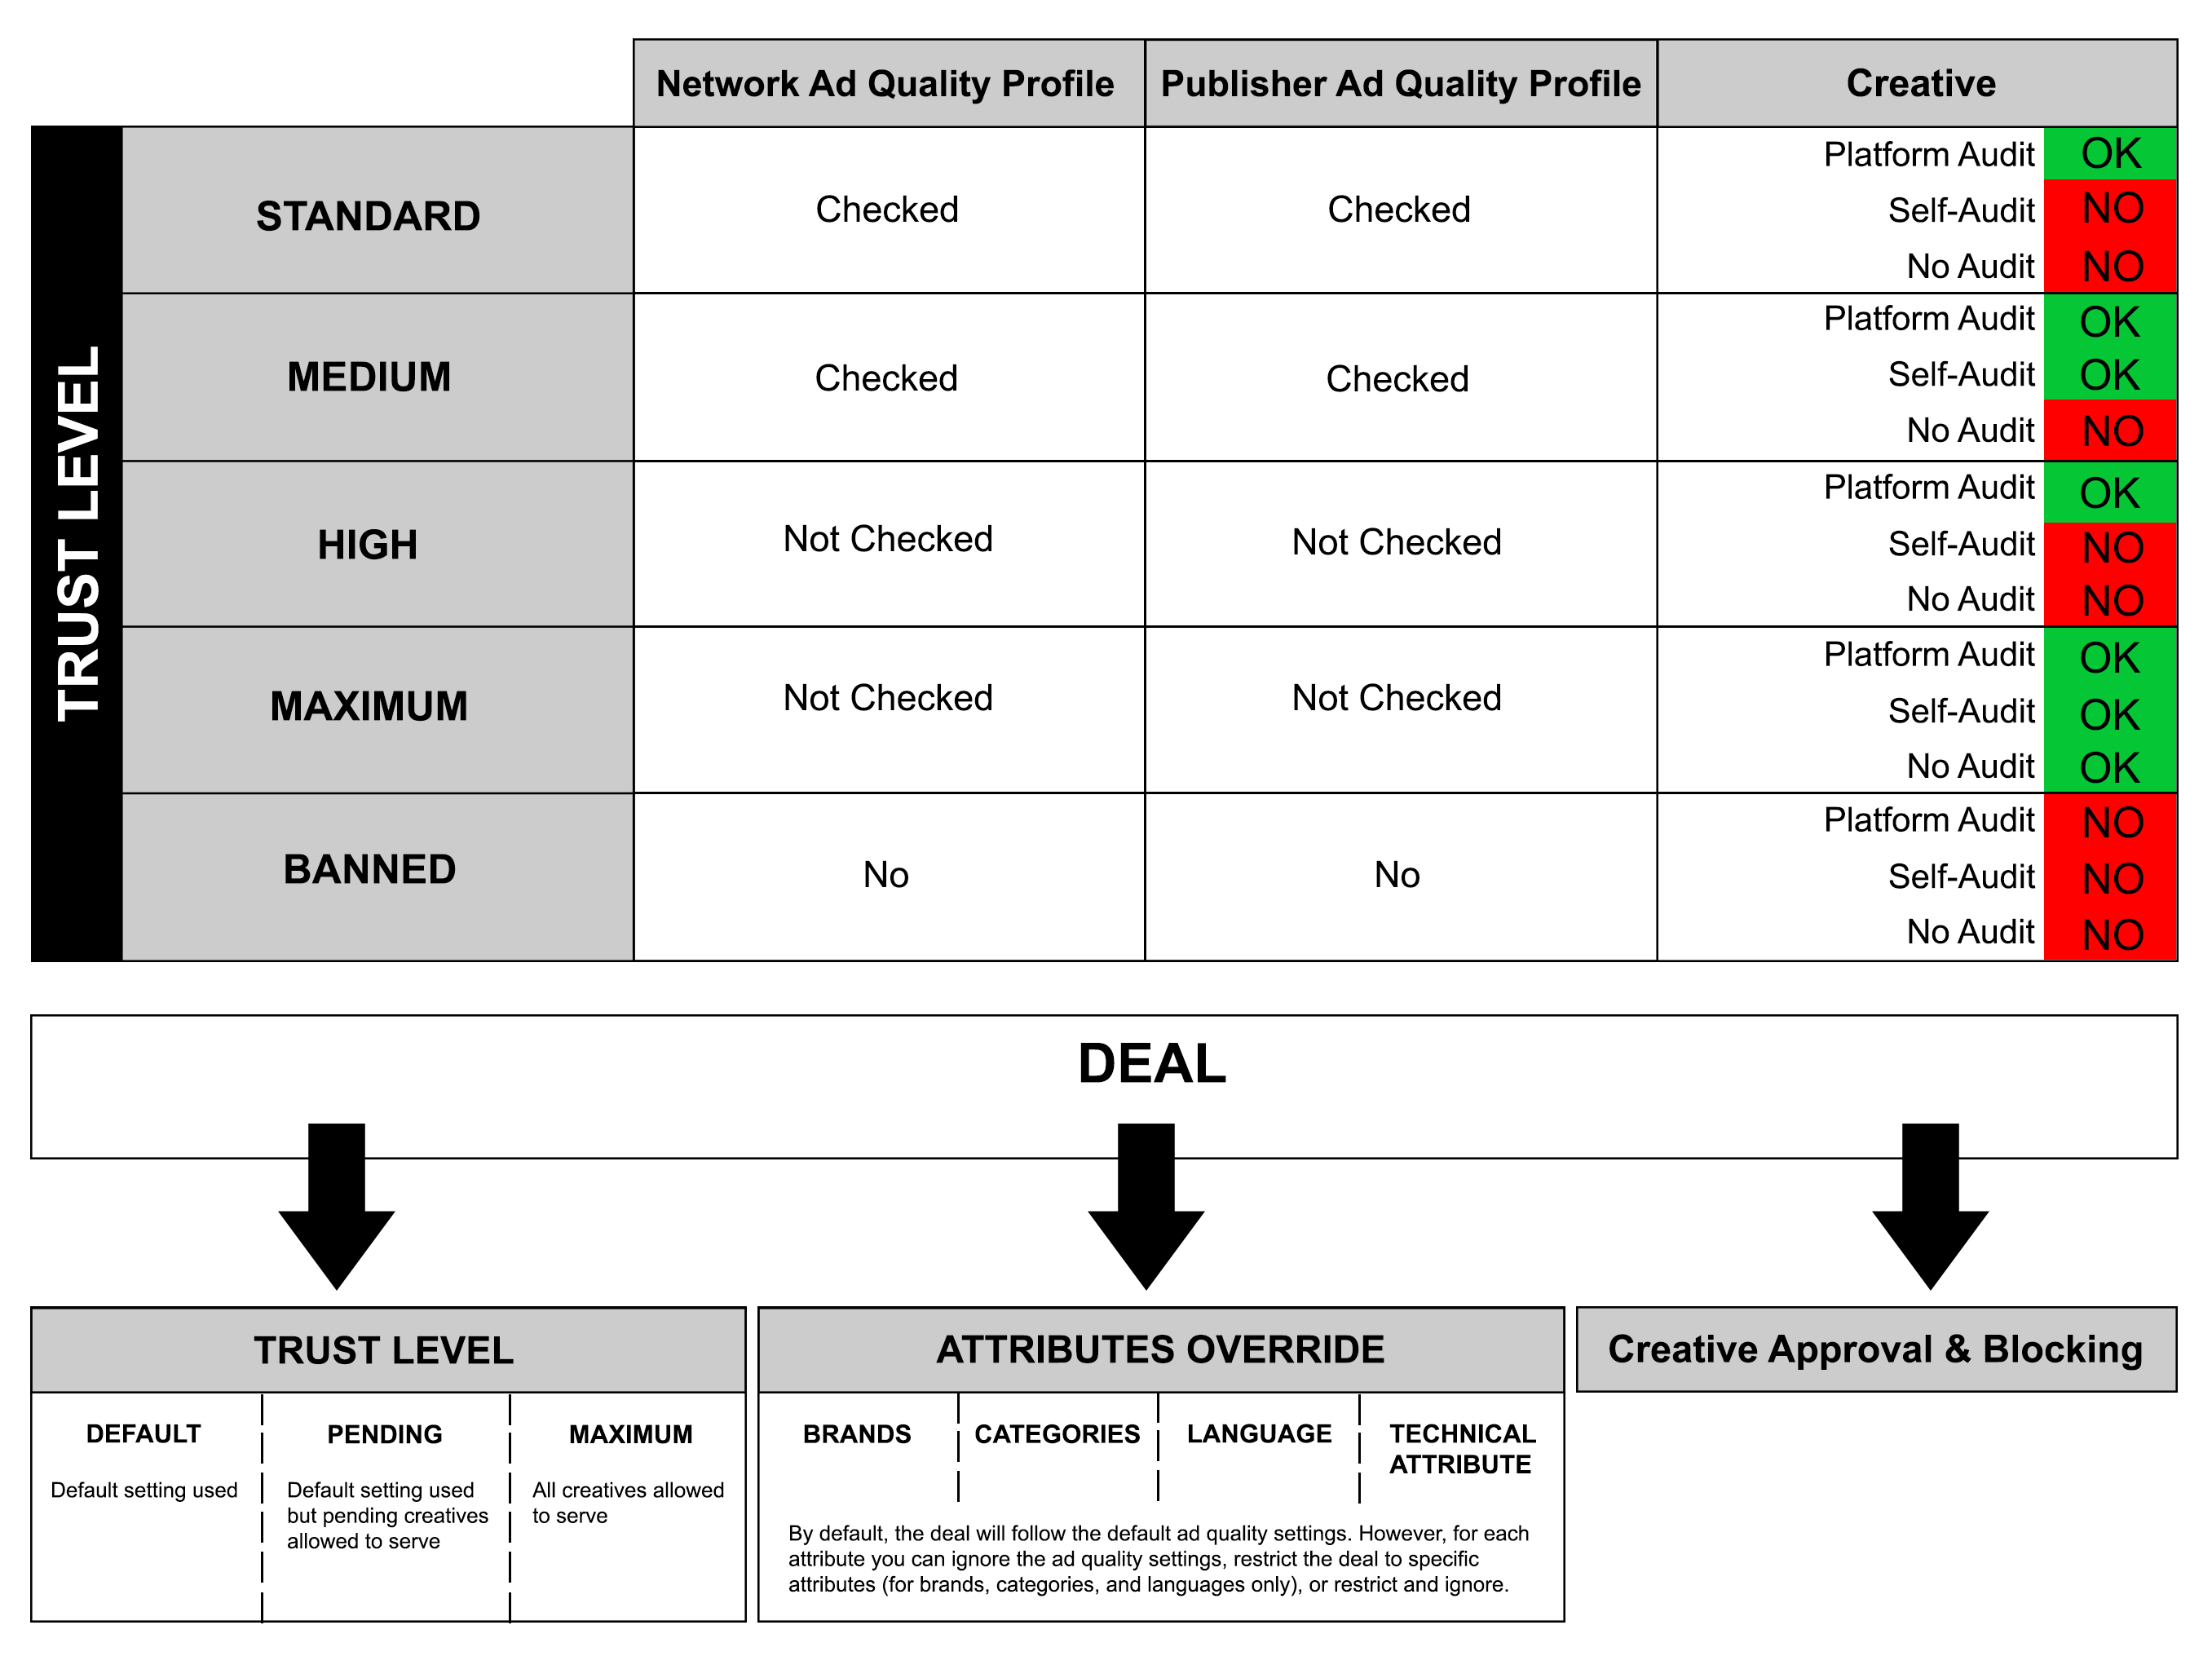 Diagram of platform buyer trust levels and its implications.